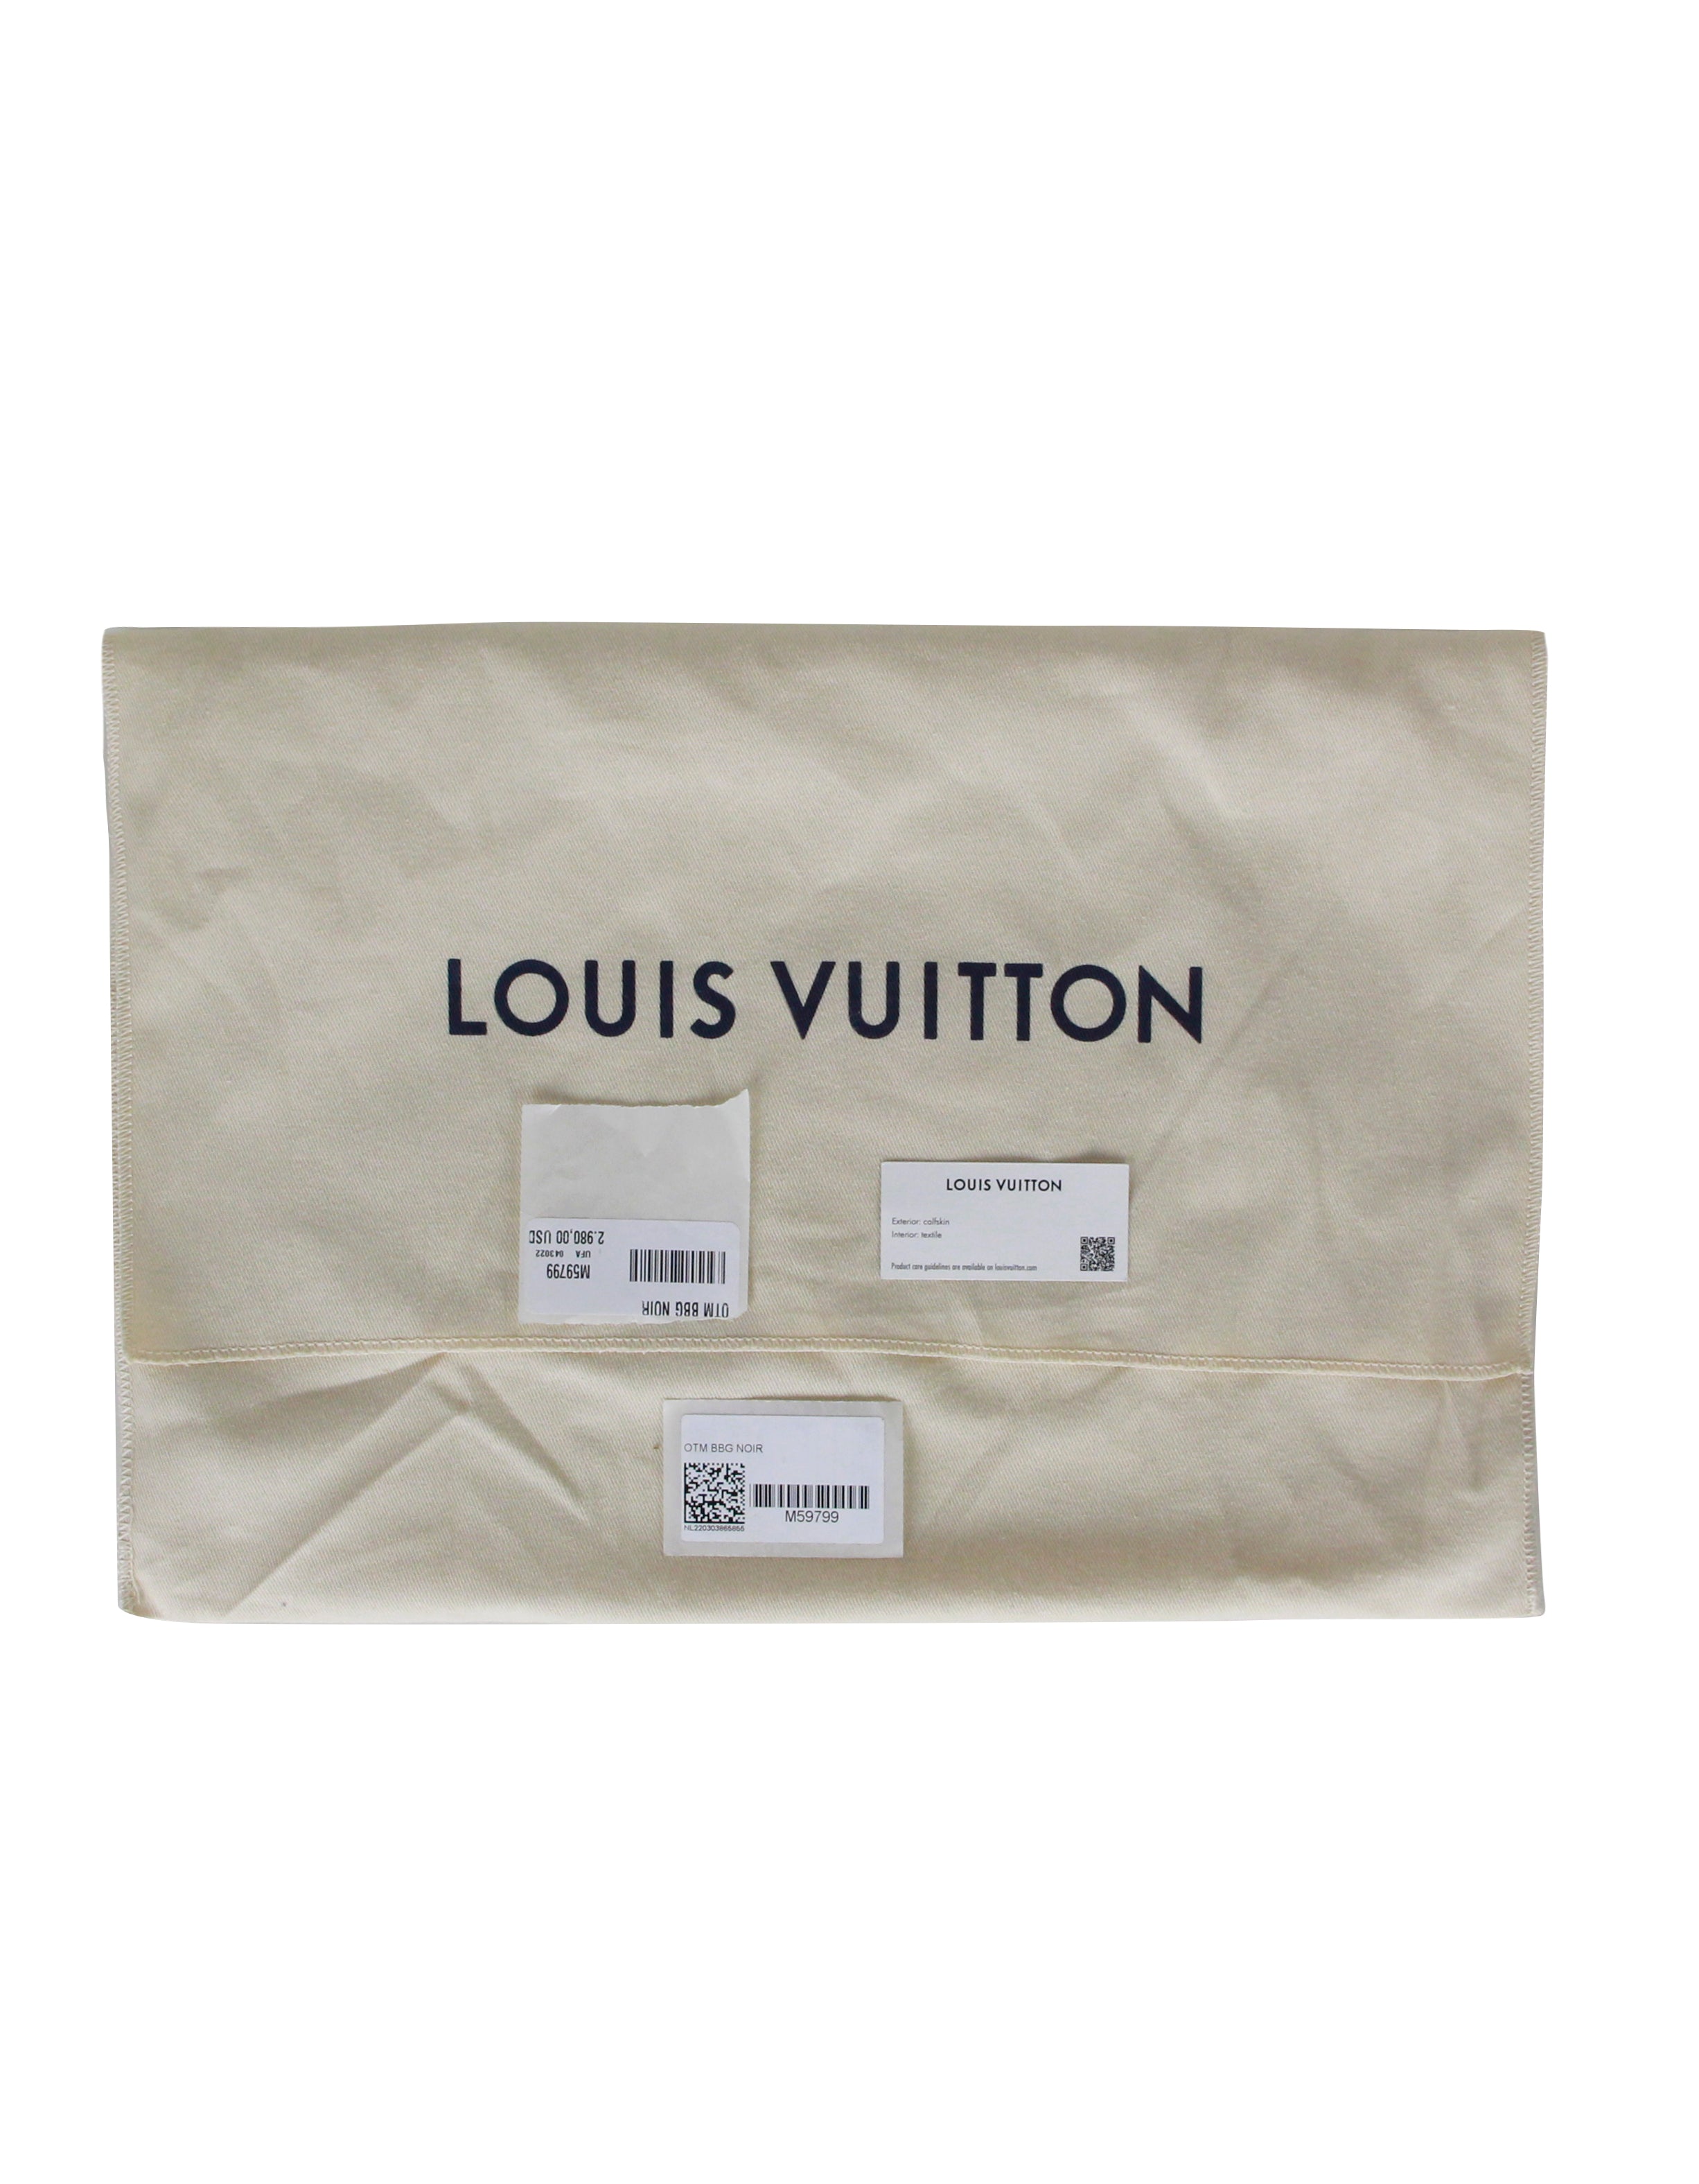 Louis Vuitton Black Leather Over The Moon Crossbody Bag